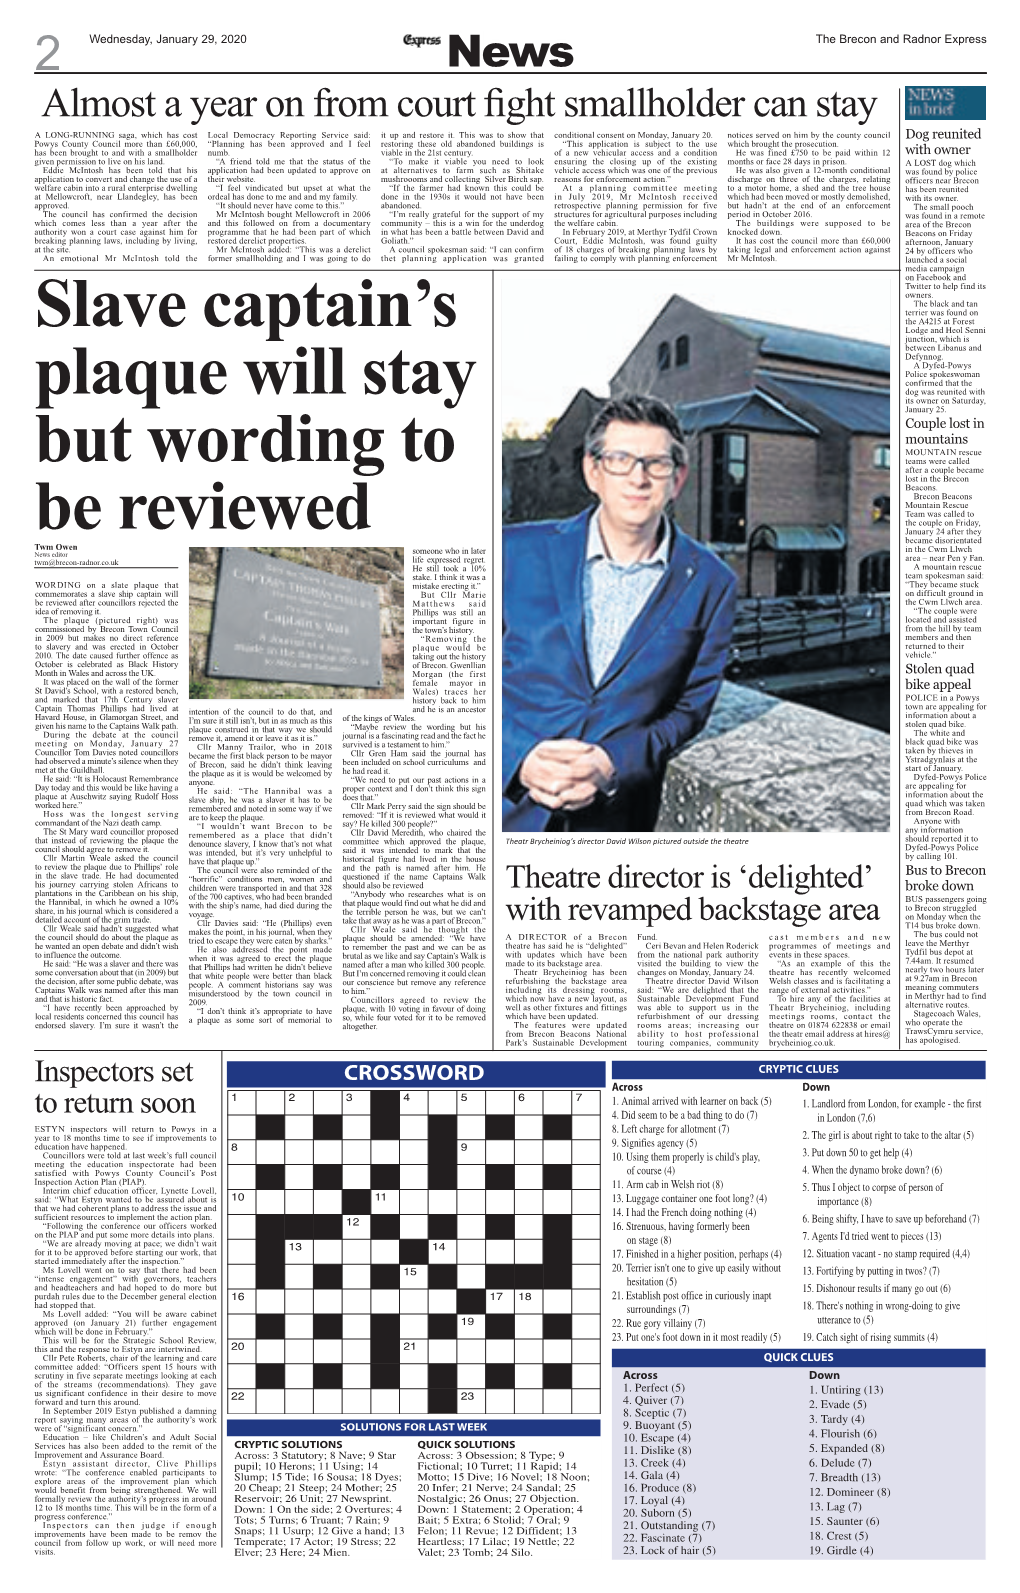 Slave Captain's Plaque Will Stay but Wording to Be Reviewed